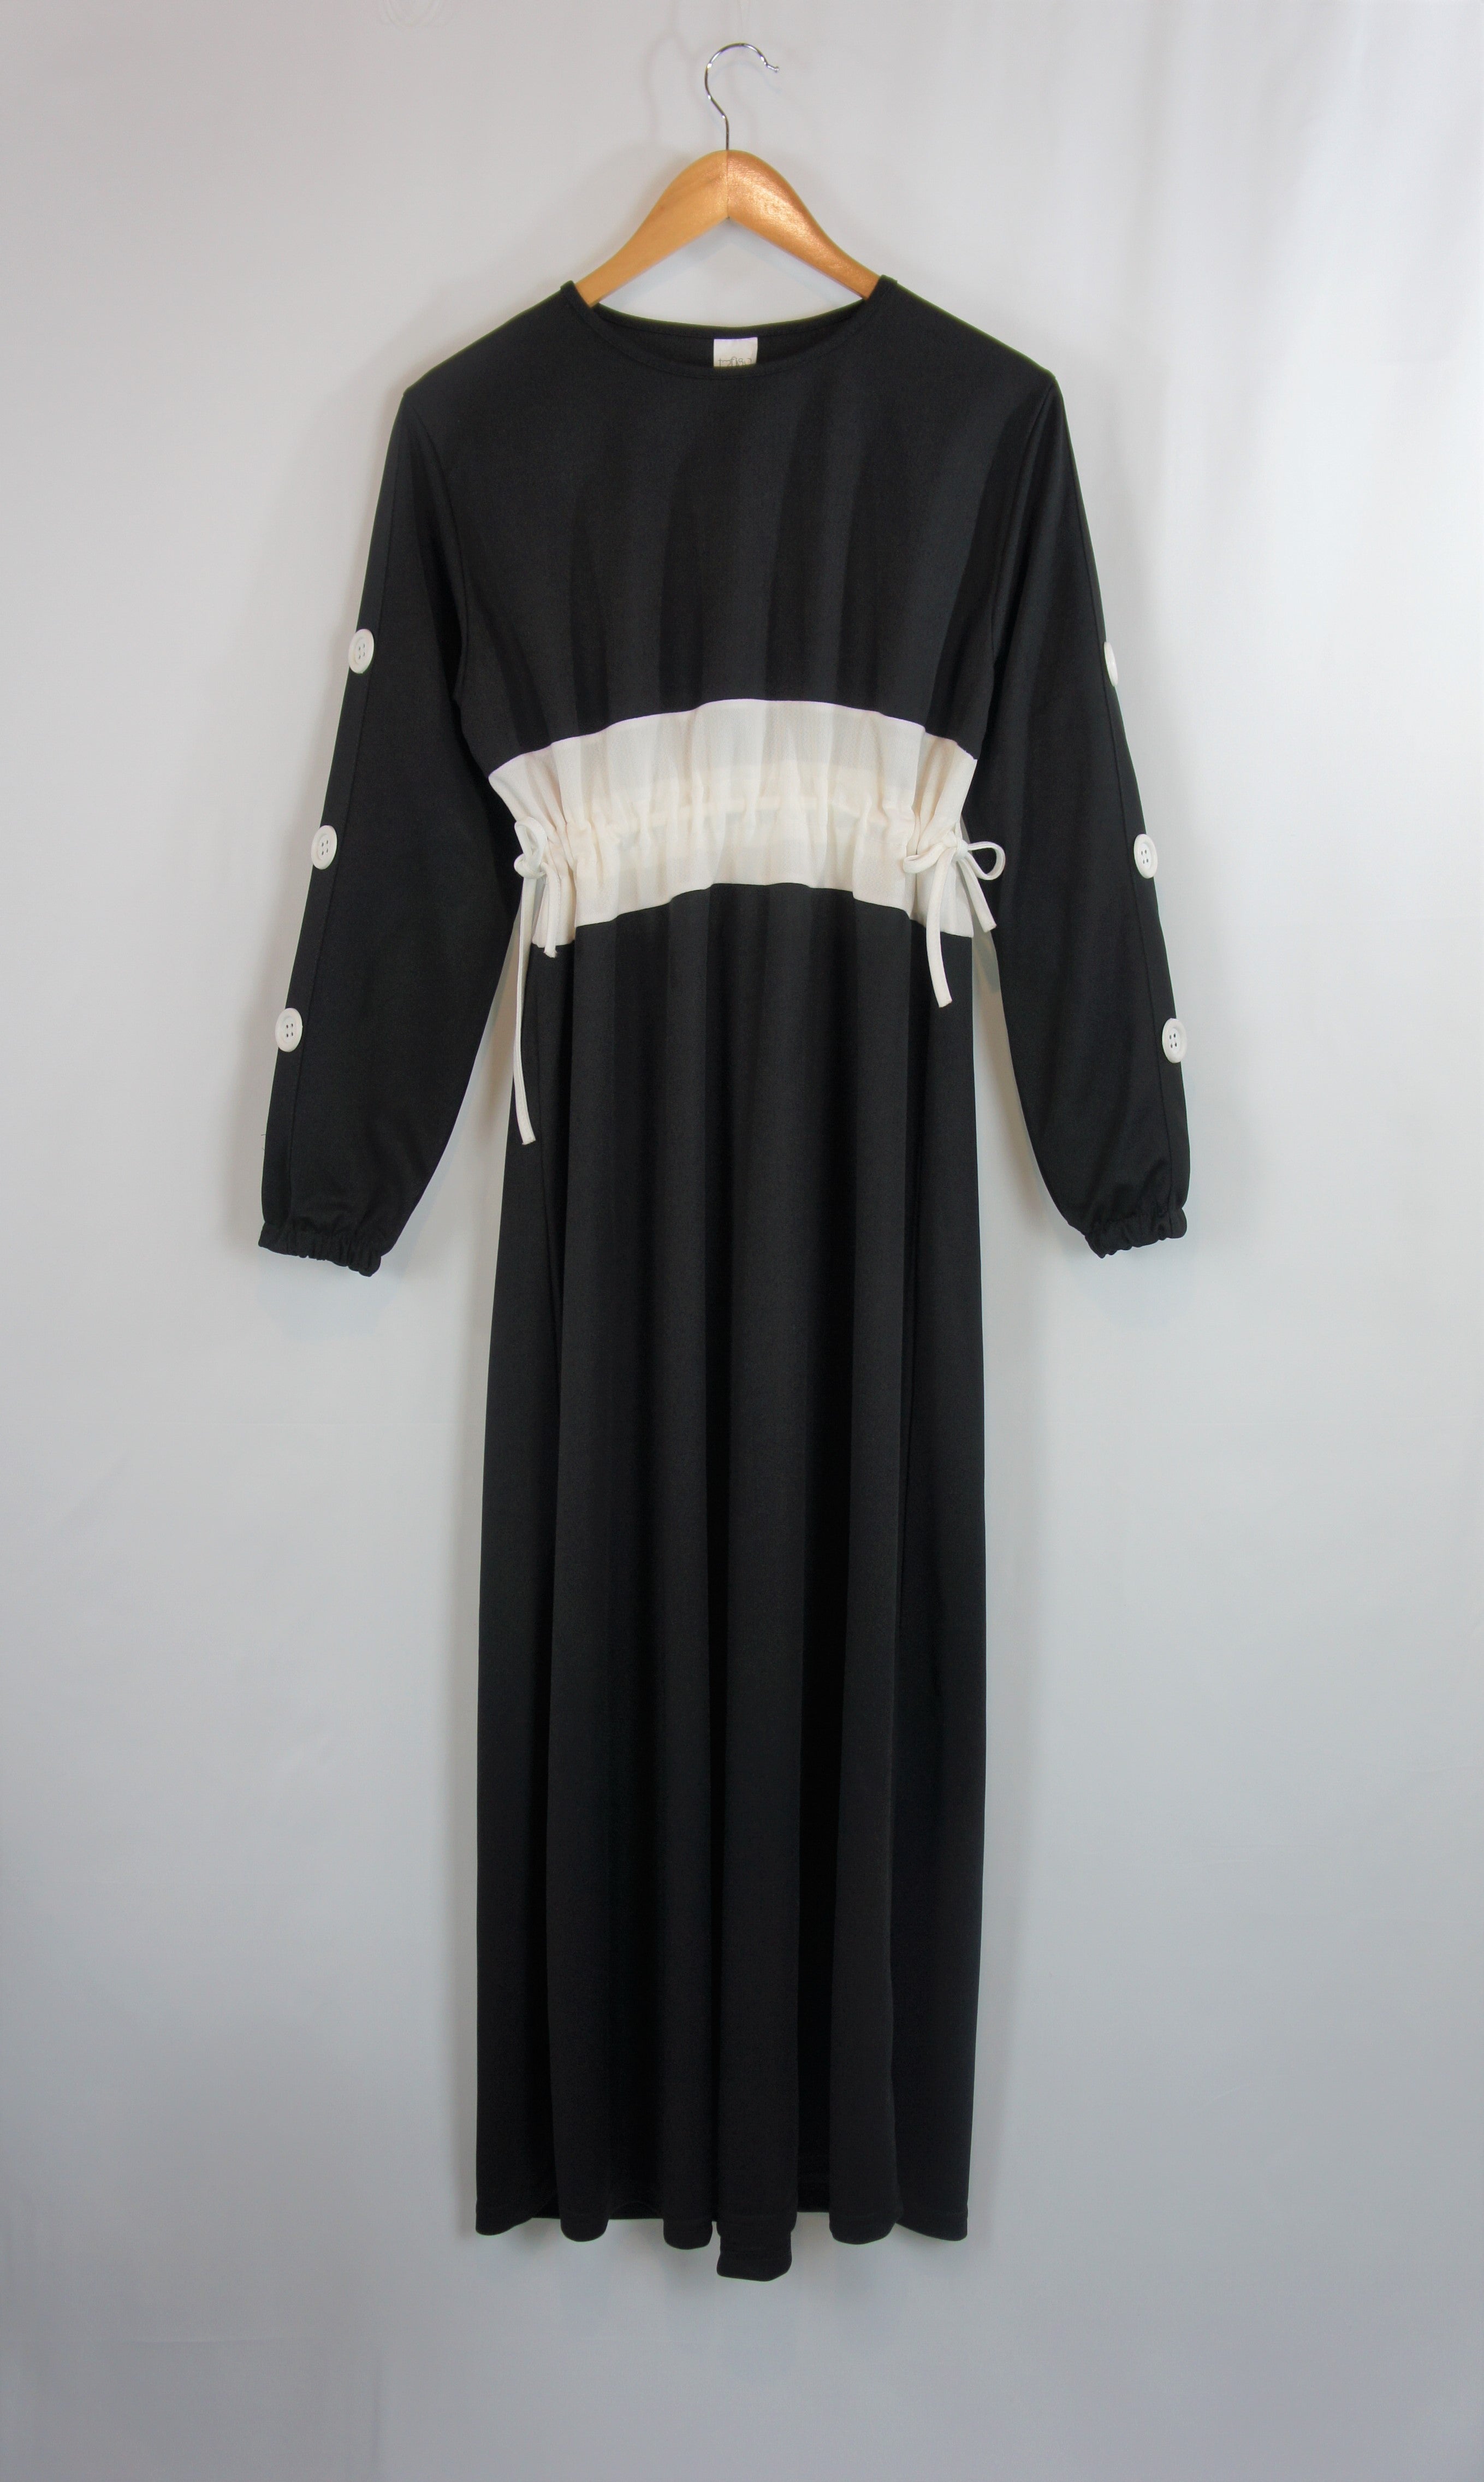 Crew Neck Unlined Modest Abaya - a perfect blend of fashion and modesty.